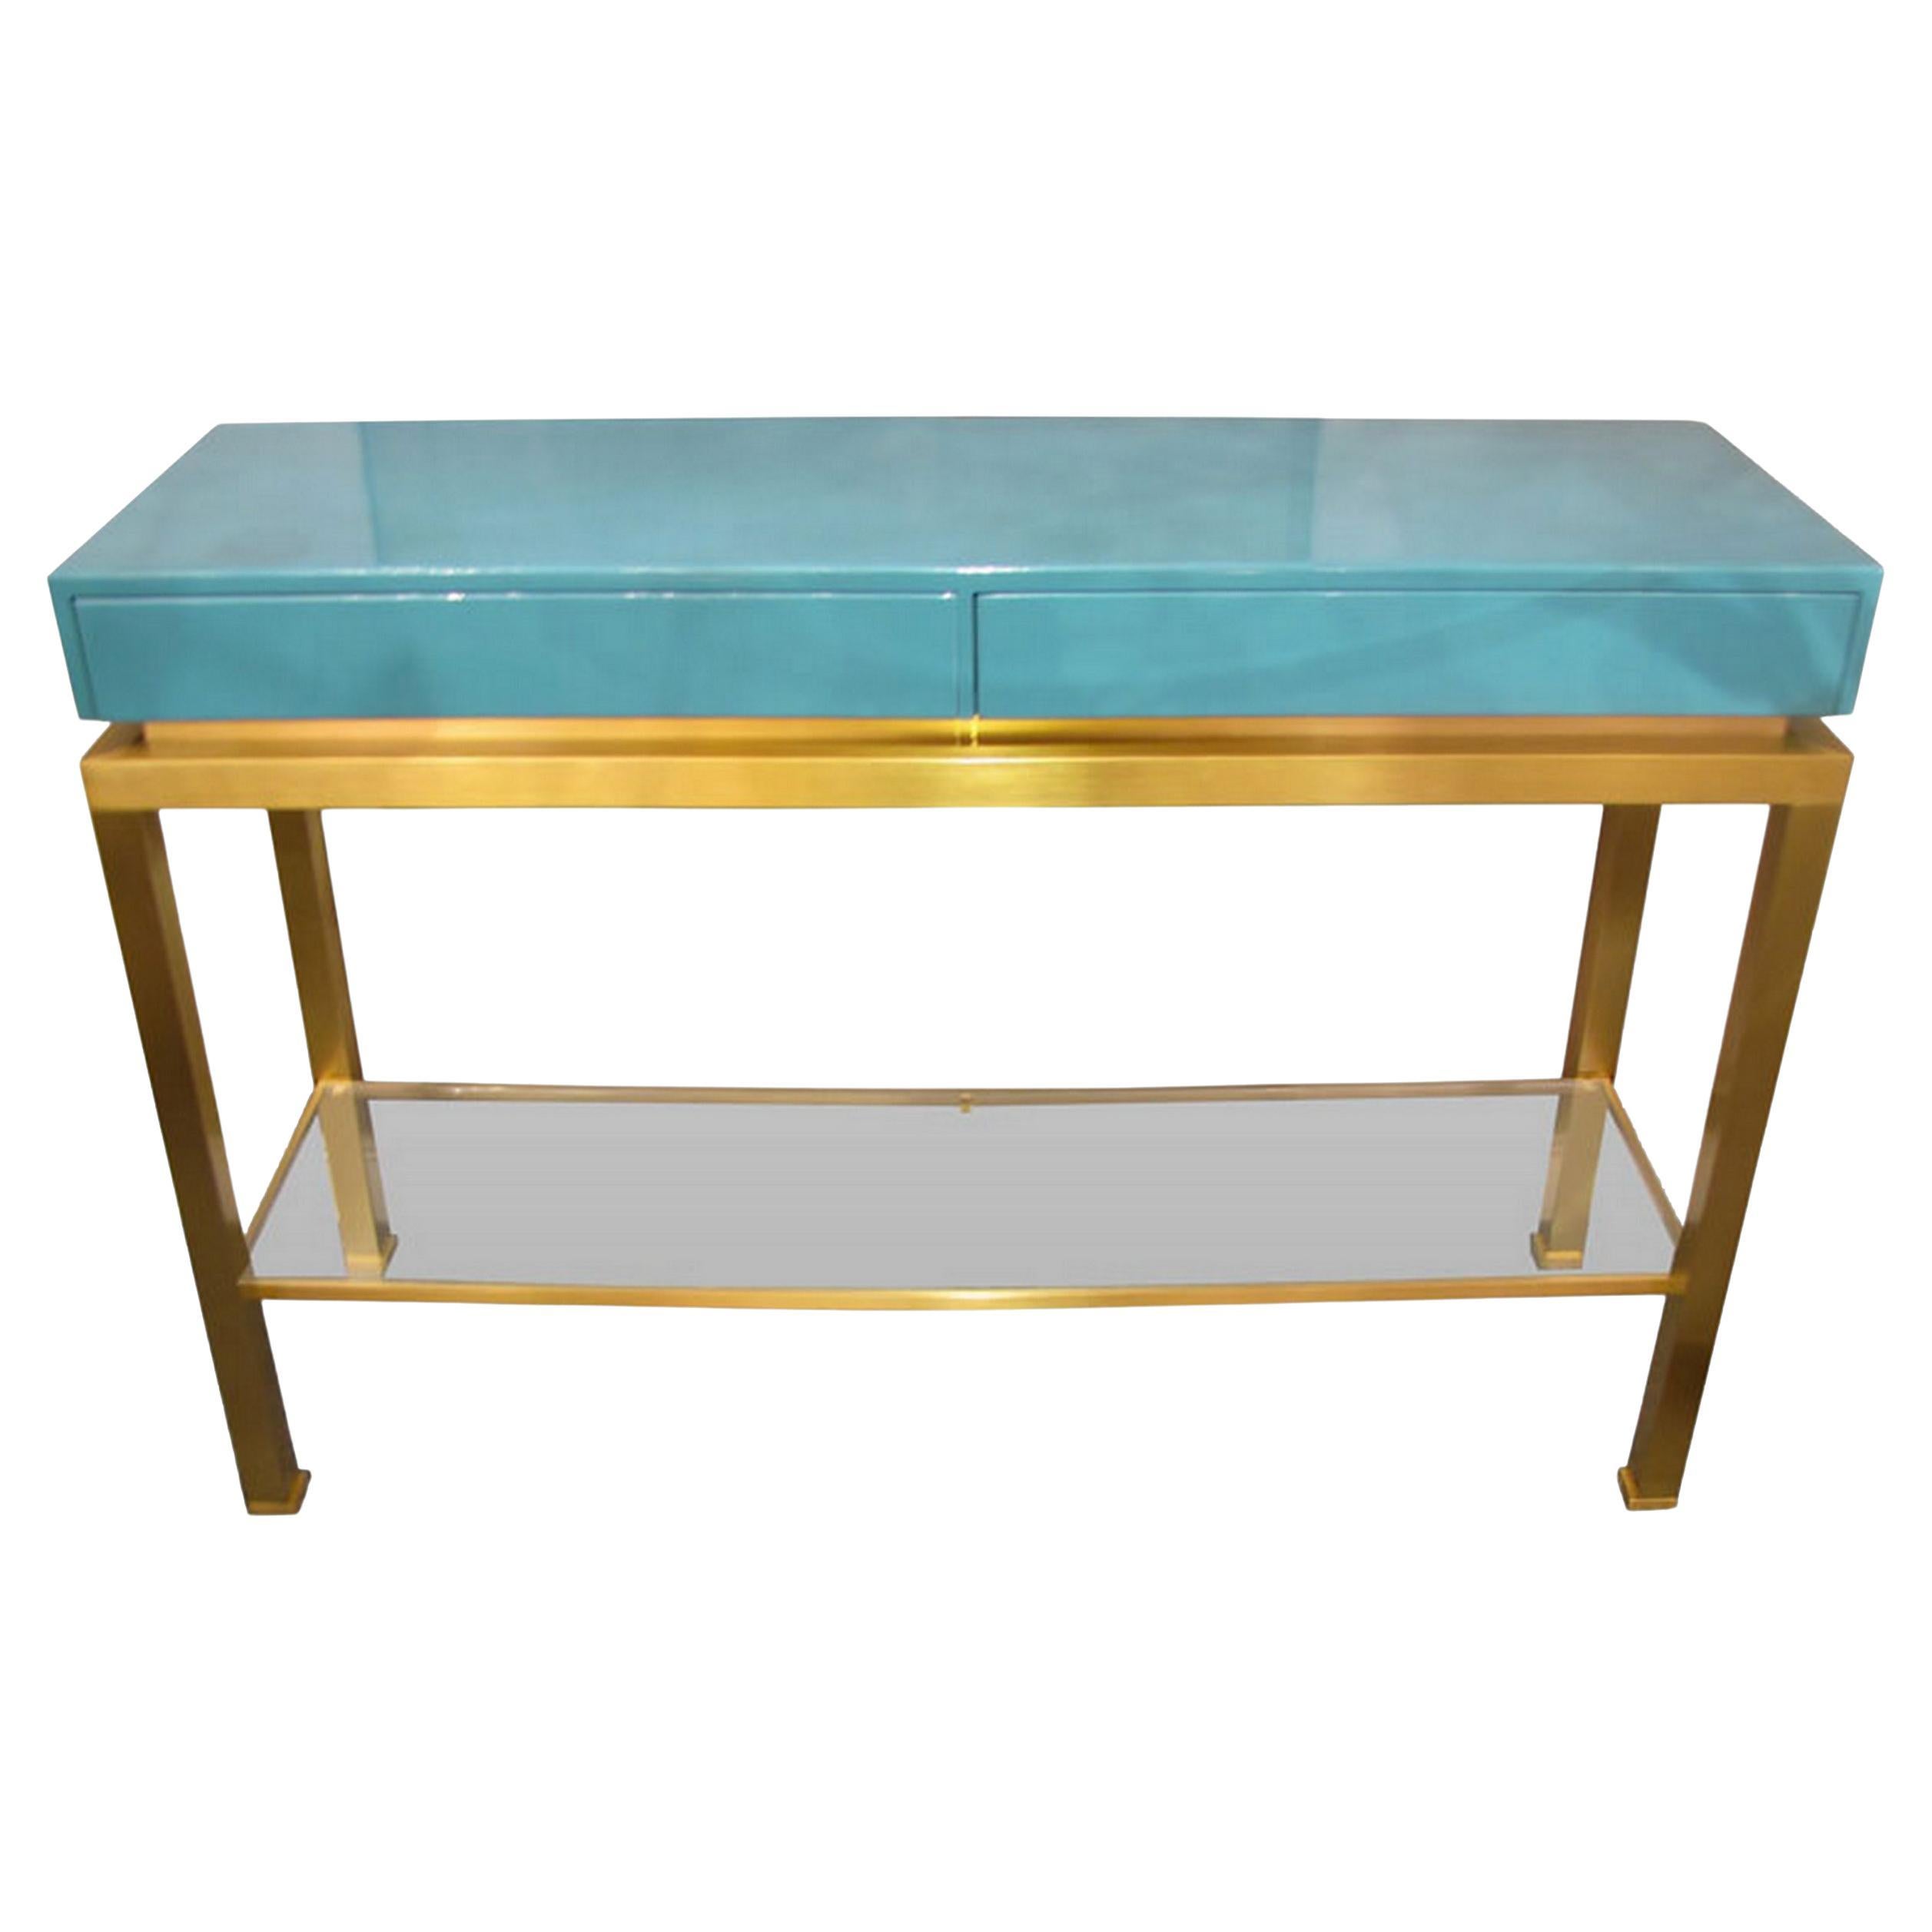 Console in brass and blue lacquered wood, by G. Lefèvre, Ed. Maison Jansen, 1970 For Sale